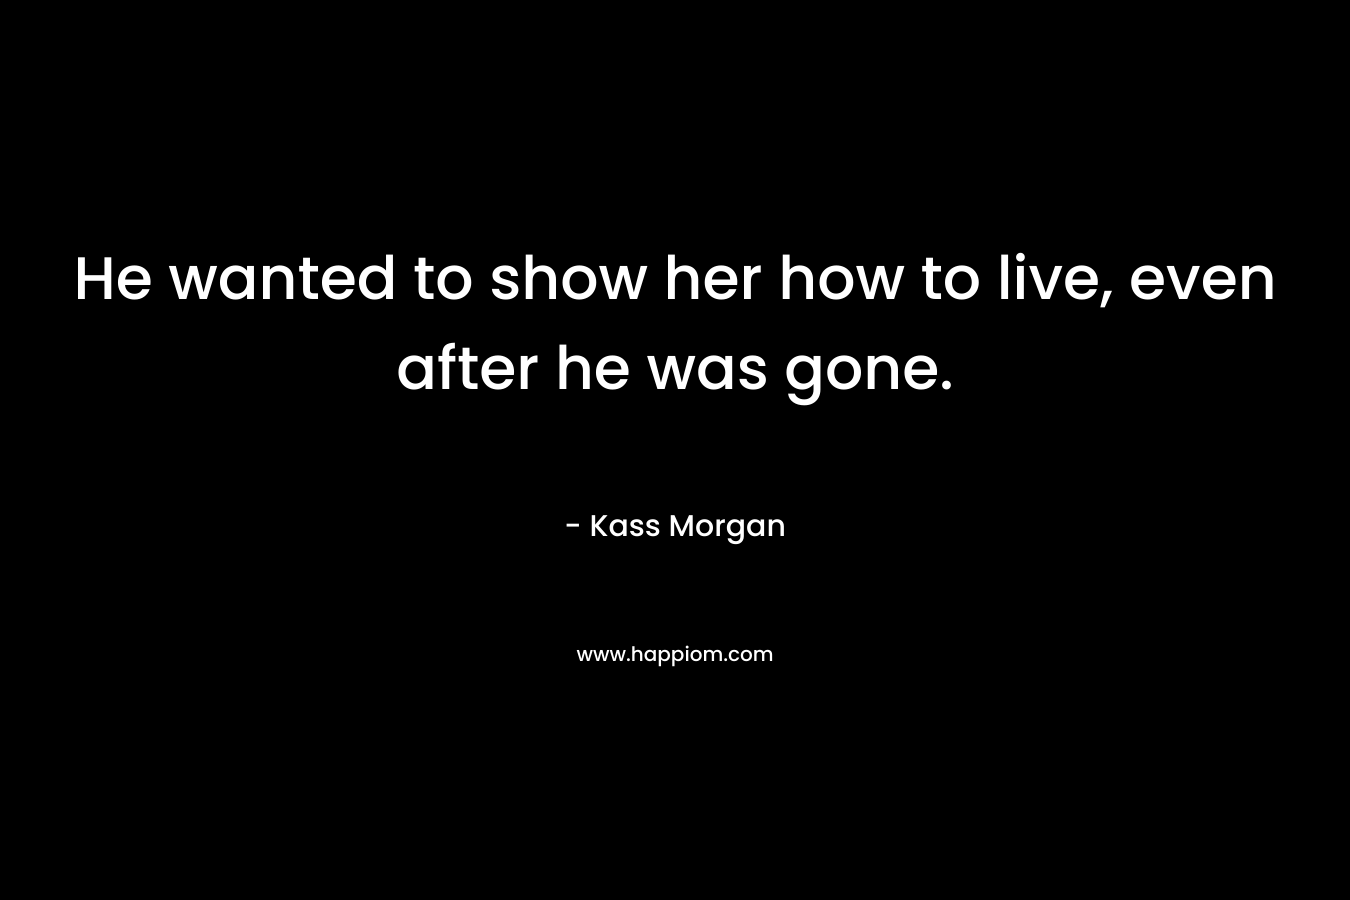 He wanted to show her how to live, even after he was gone. – Kass Morgan